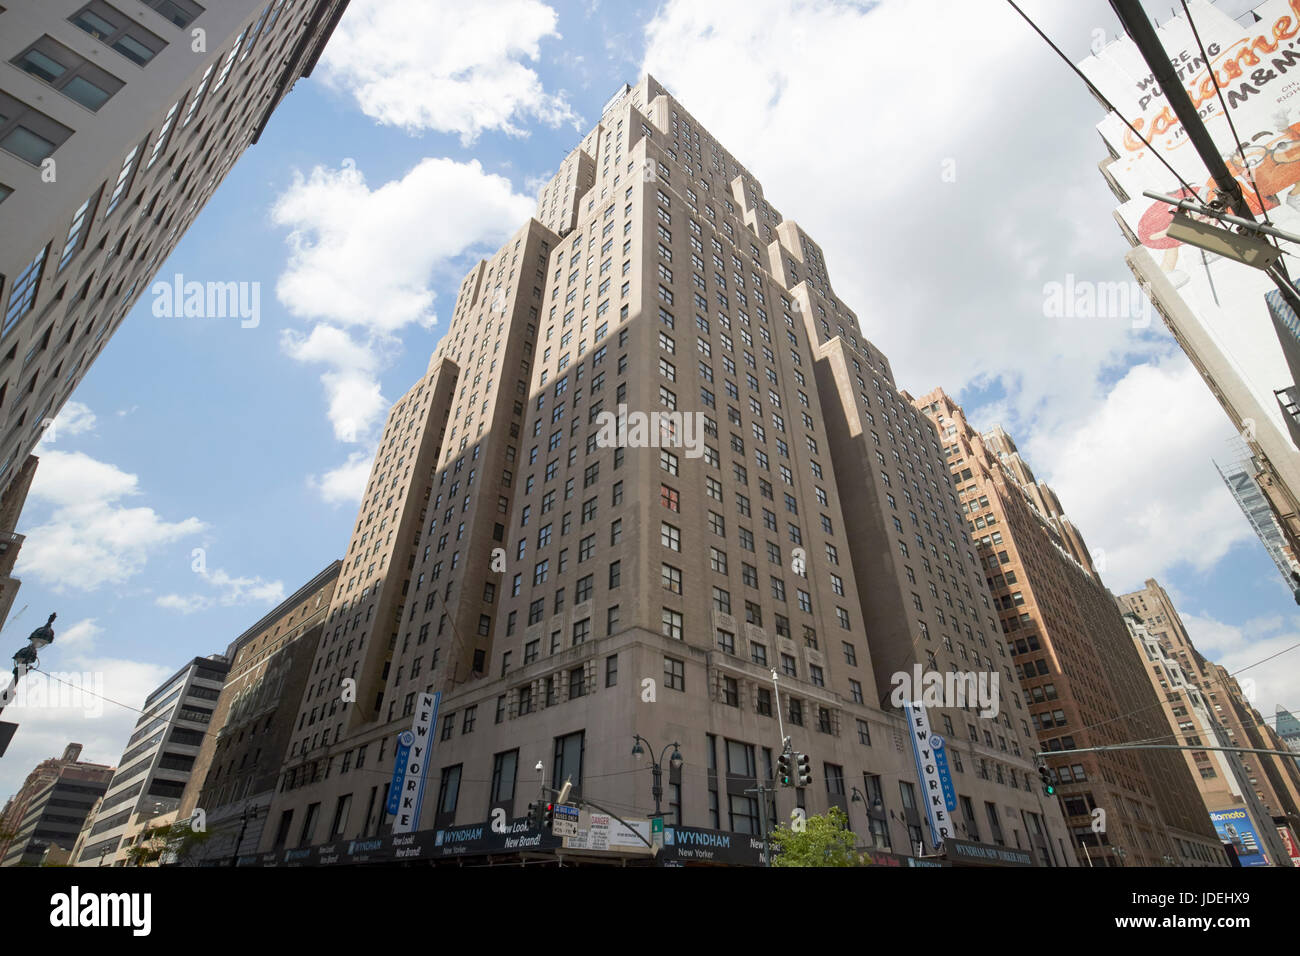 Le Wyndham New Yorker Hotel New York USA Banque D'Images